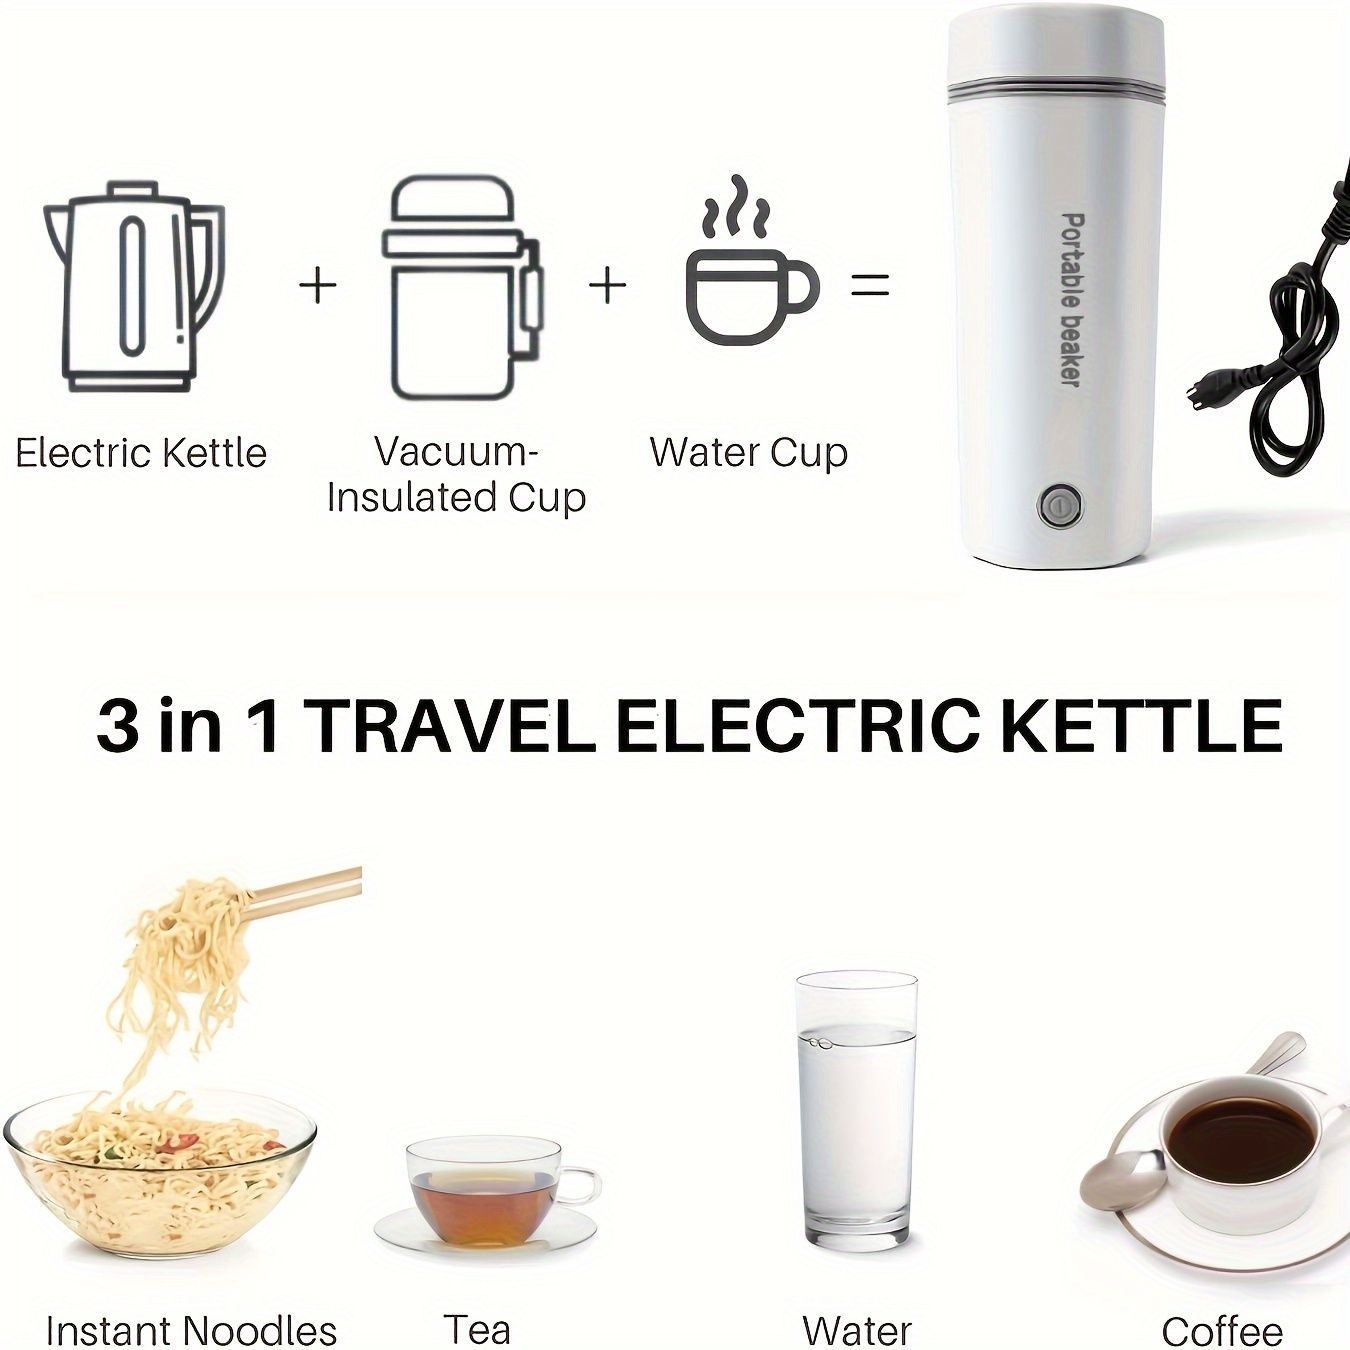  Portable Travel Kettle, Portable Mini Heating Cup, 3